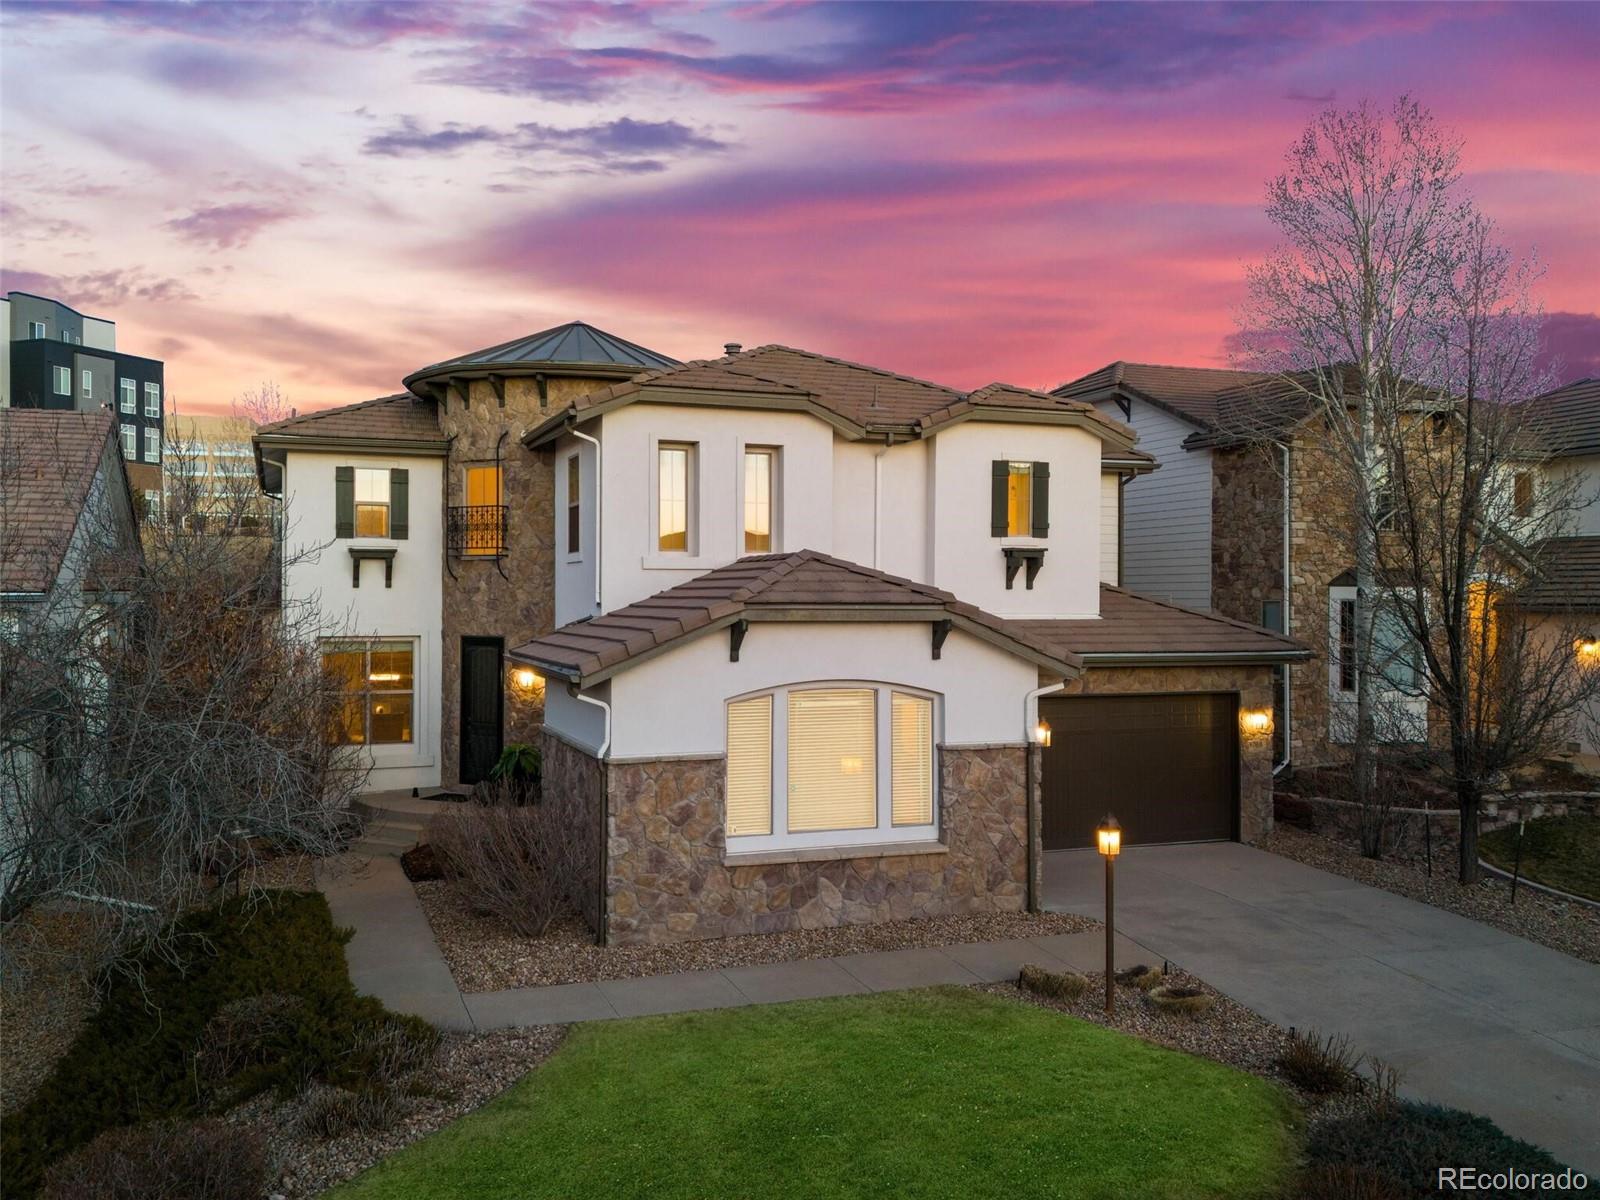 9700  Sunset Hill Circle, lone tree MLS: 5110420 Beds: 4 Baths: 4 Price: $1,200,000